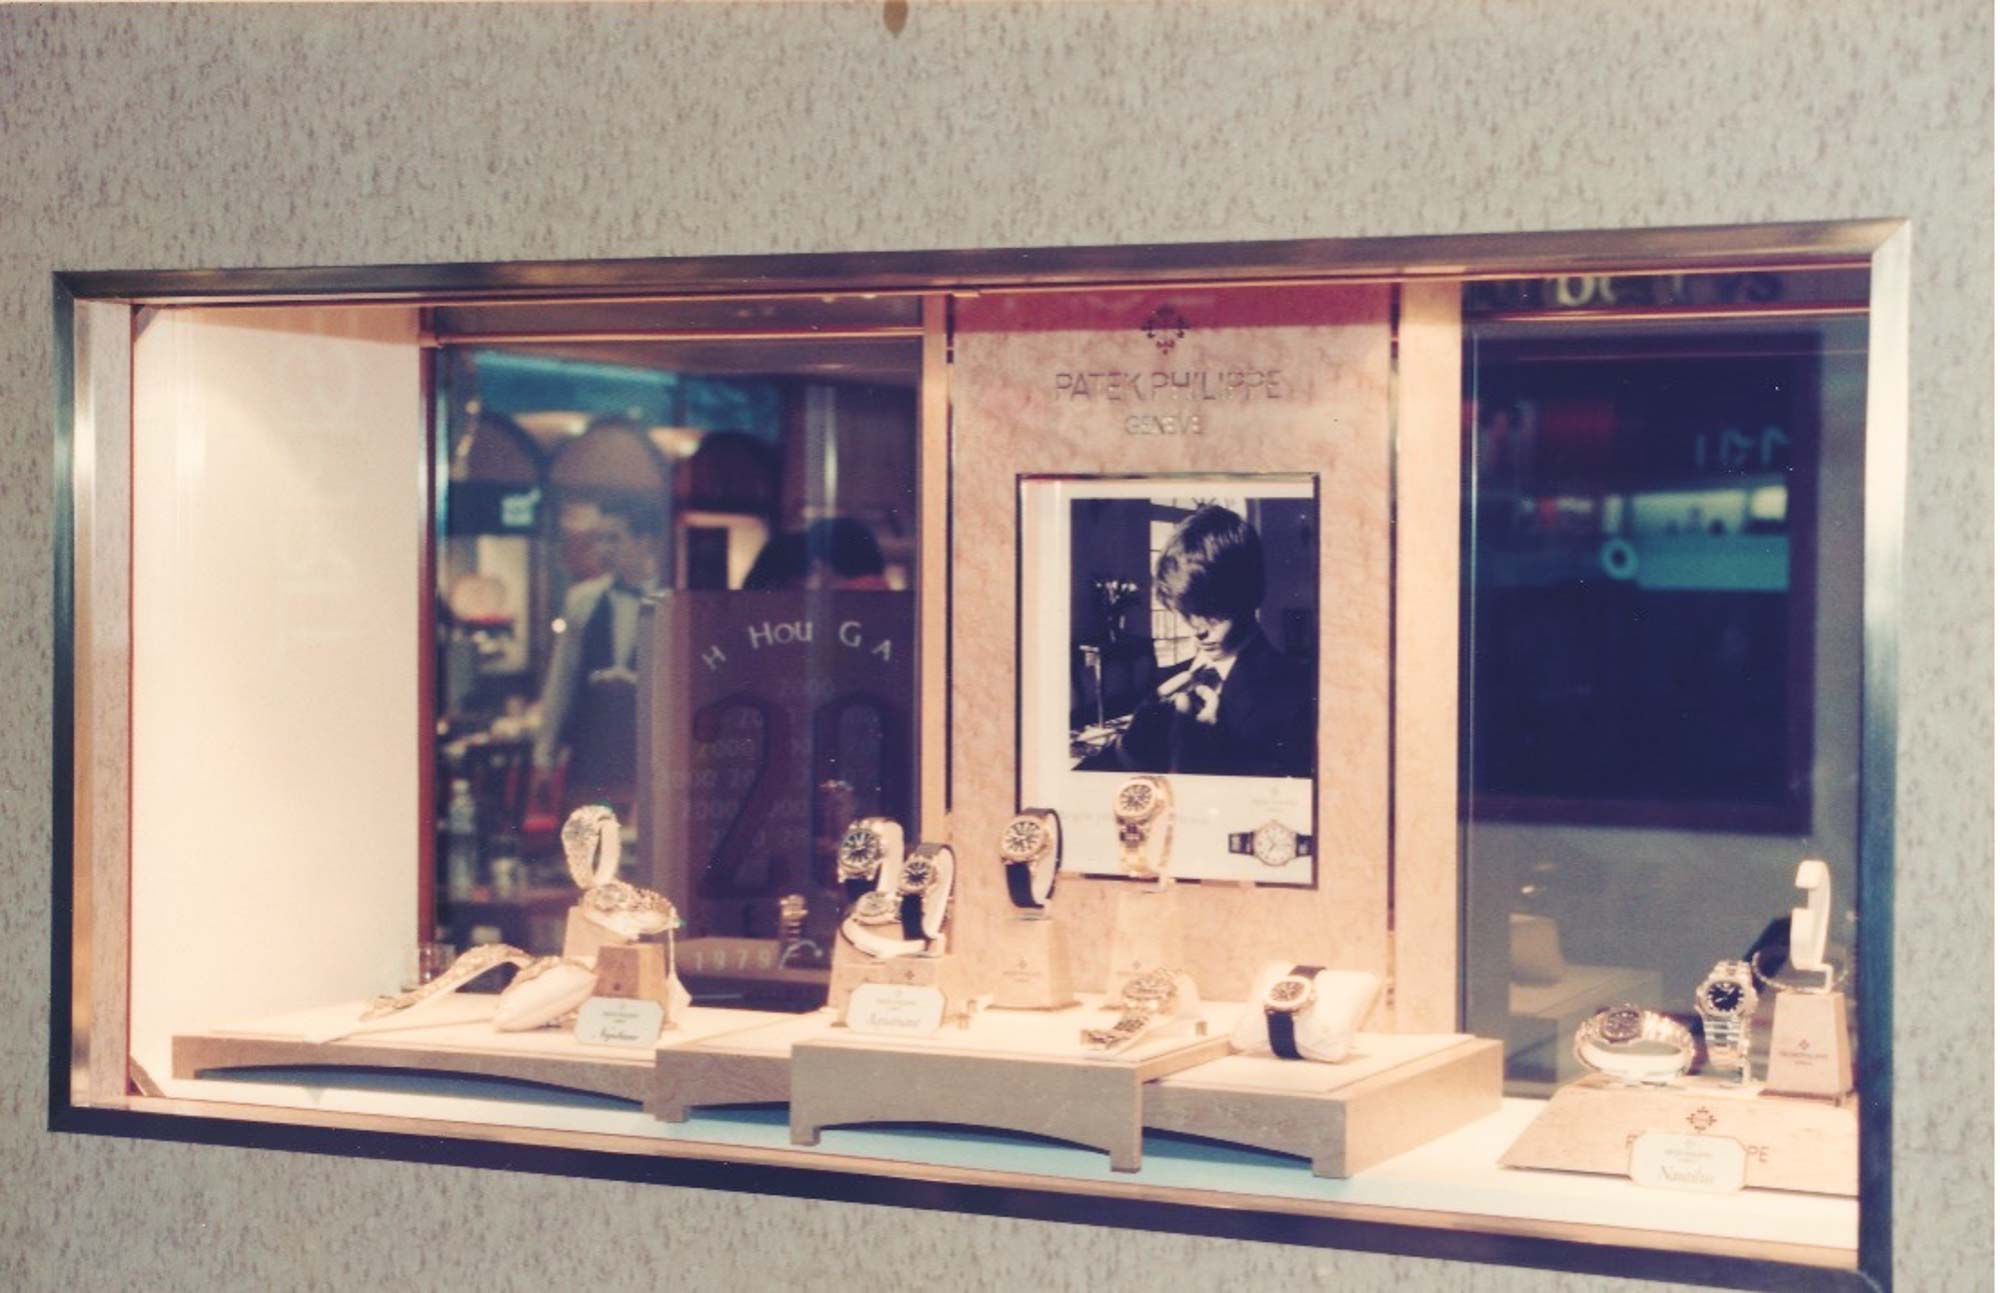 The Newly Launched Aquanaut Collection Was Proudly Exhibited In The Window Showcase Of The Hour Glass Scotts Boutique In August 1999.